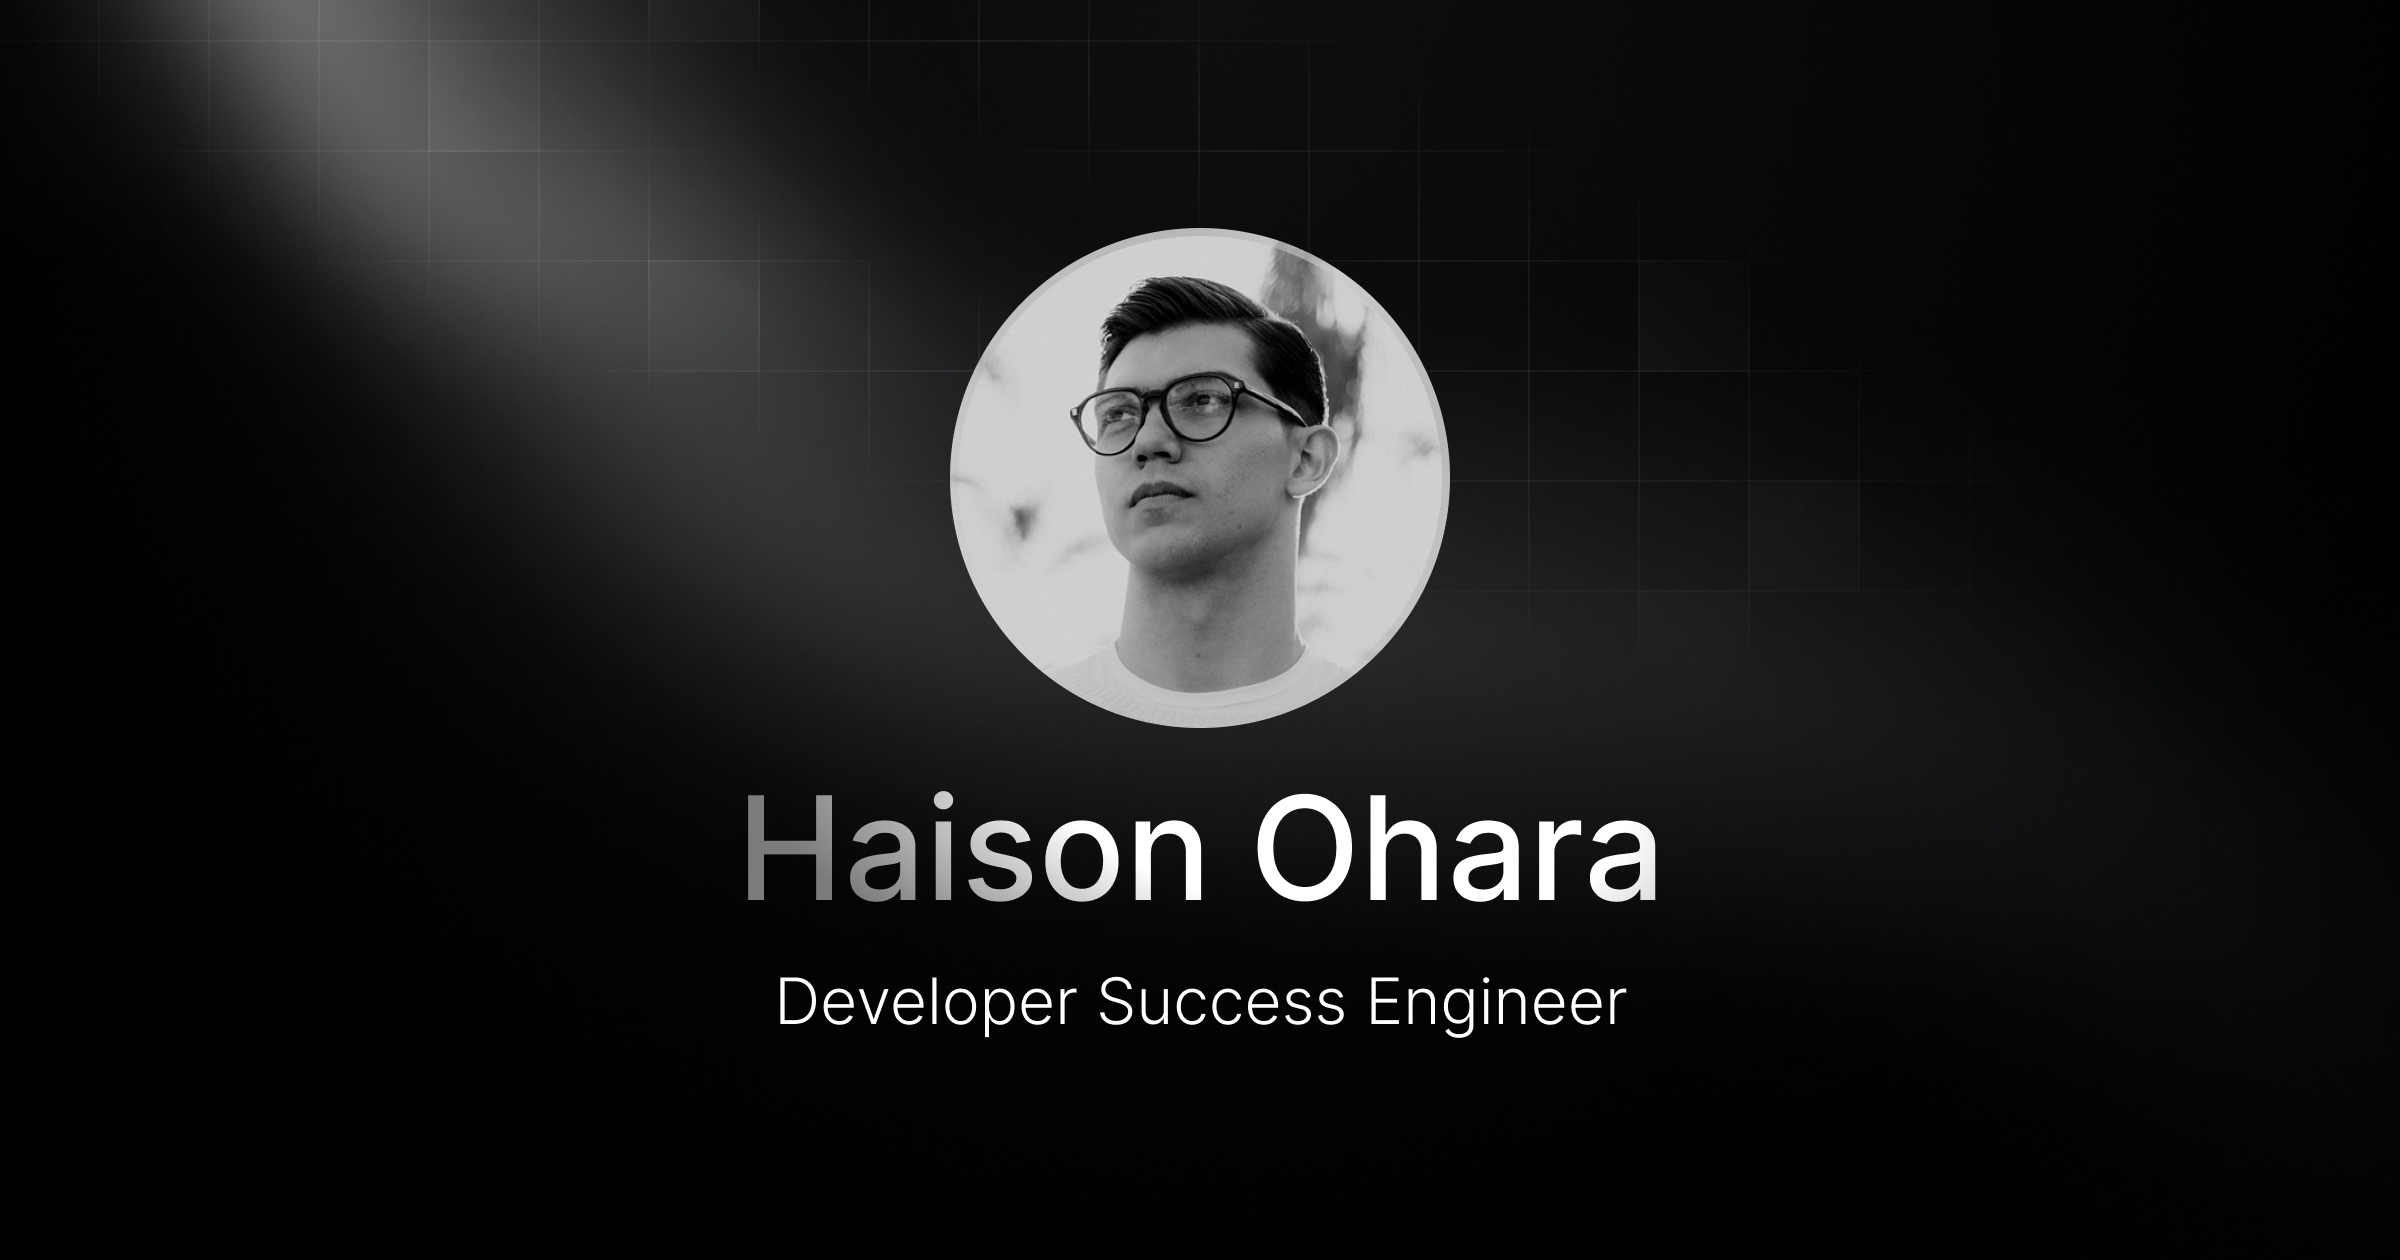 Welcoming Haison Ohara, our new Developer Success Engineer